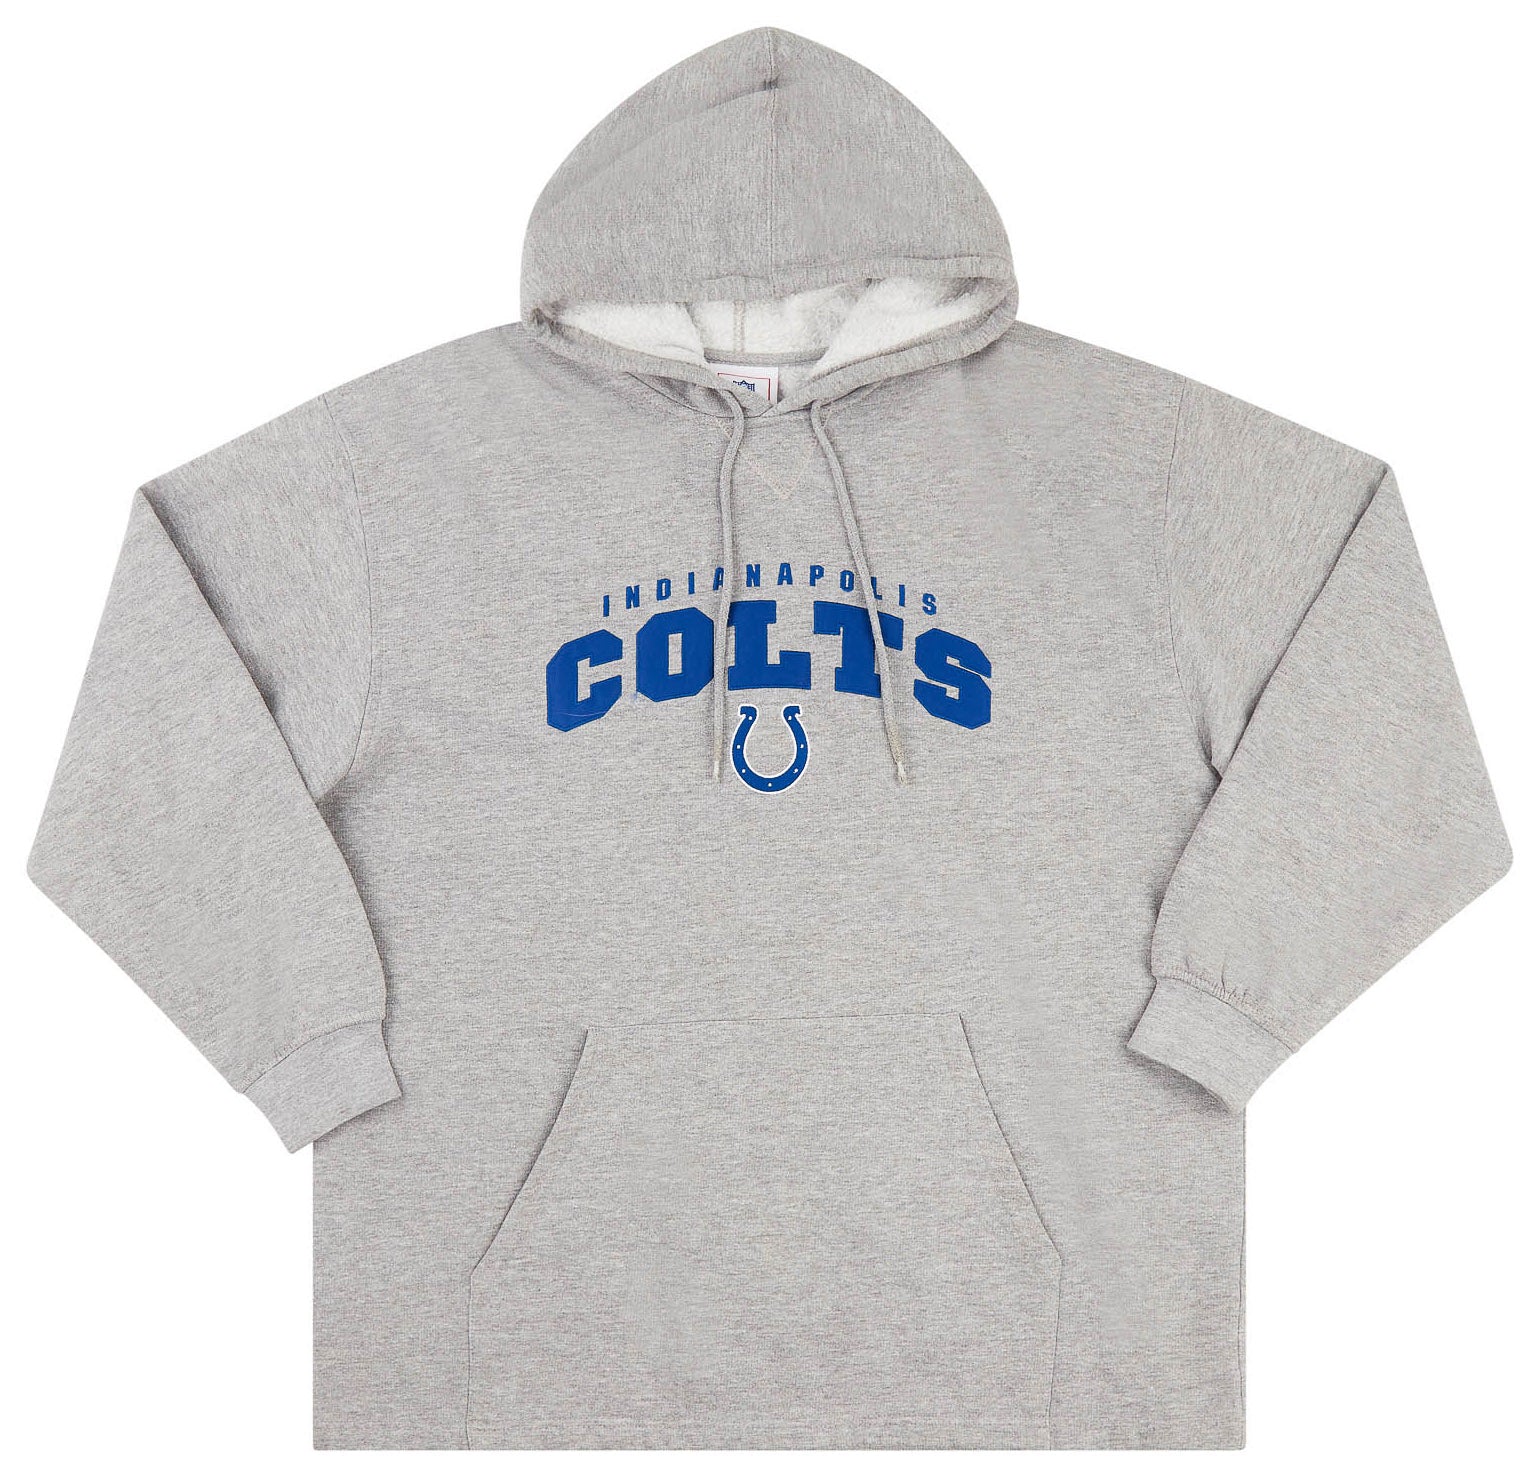 2006 INDIANAPOLIS COLTS NFL HOODED SWEAT TOP L